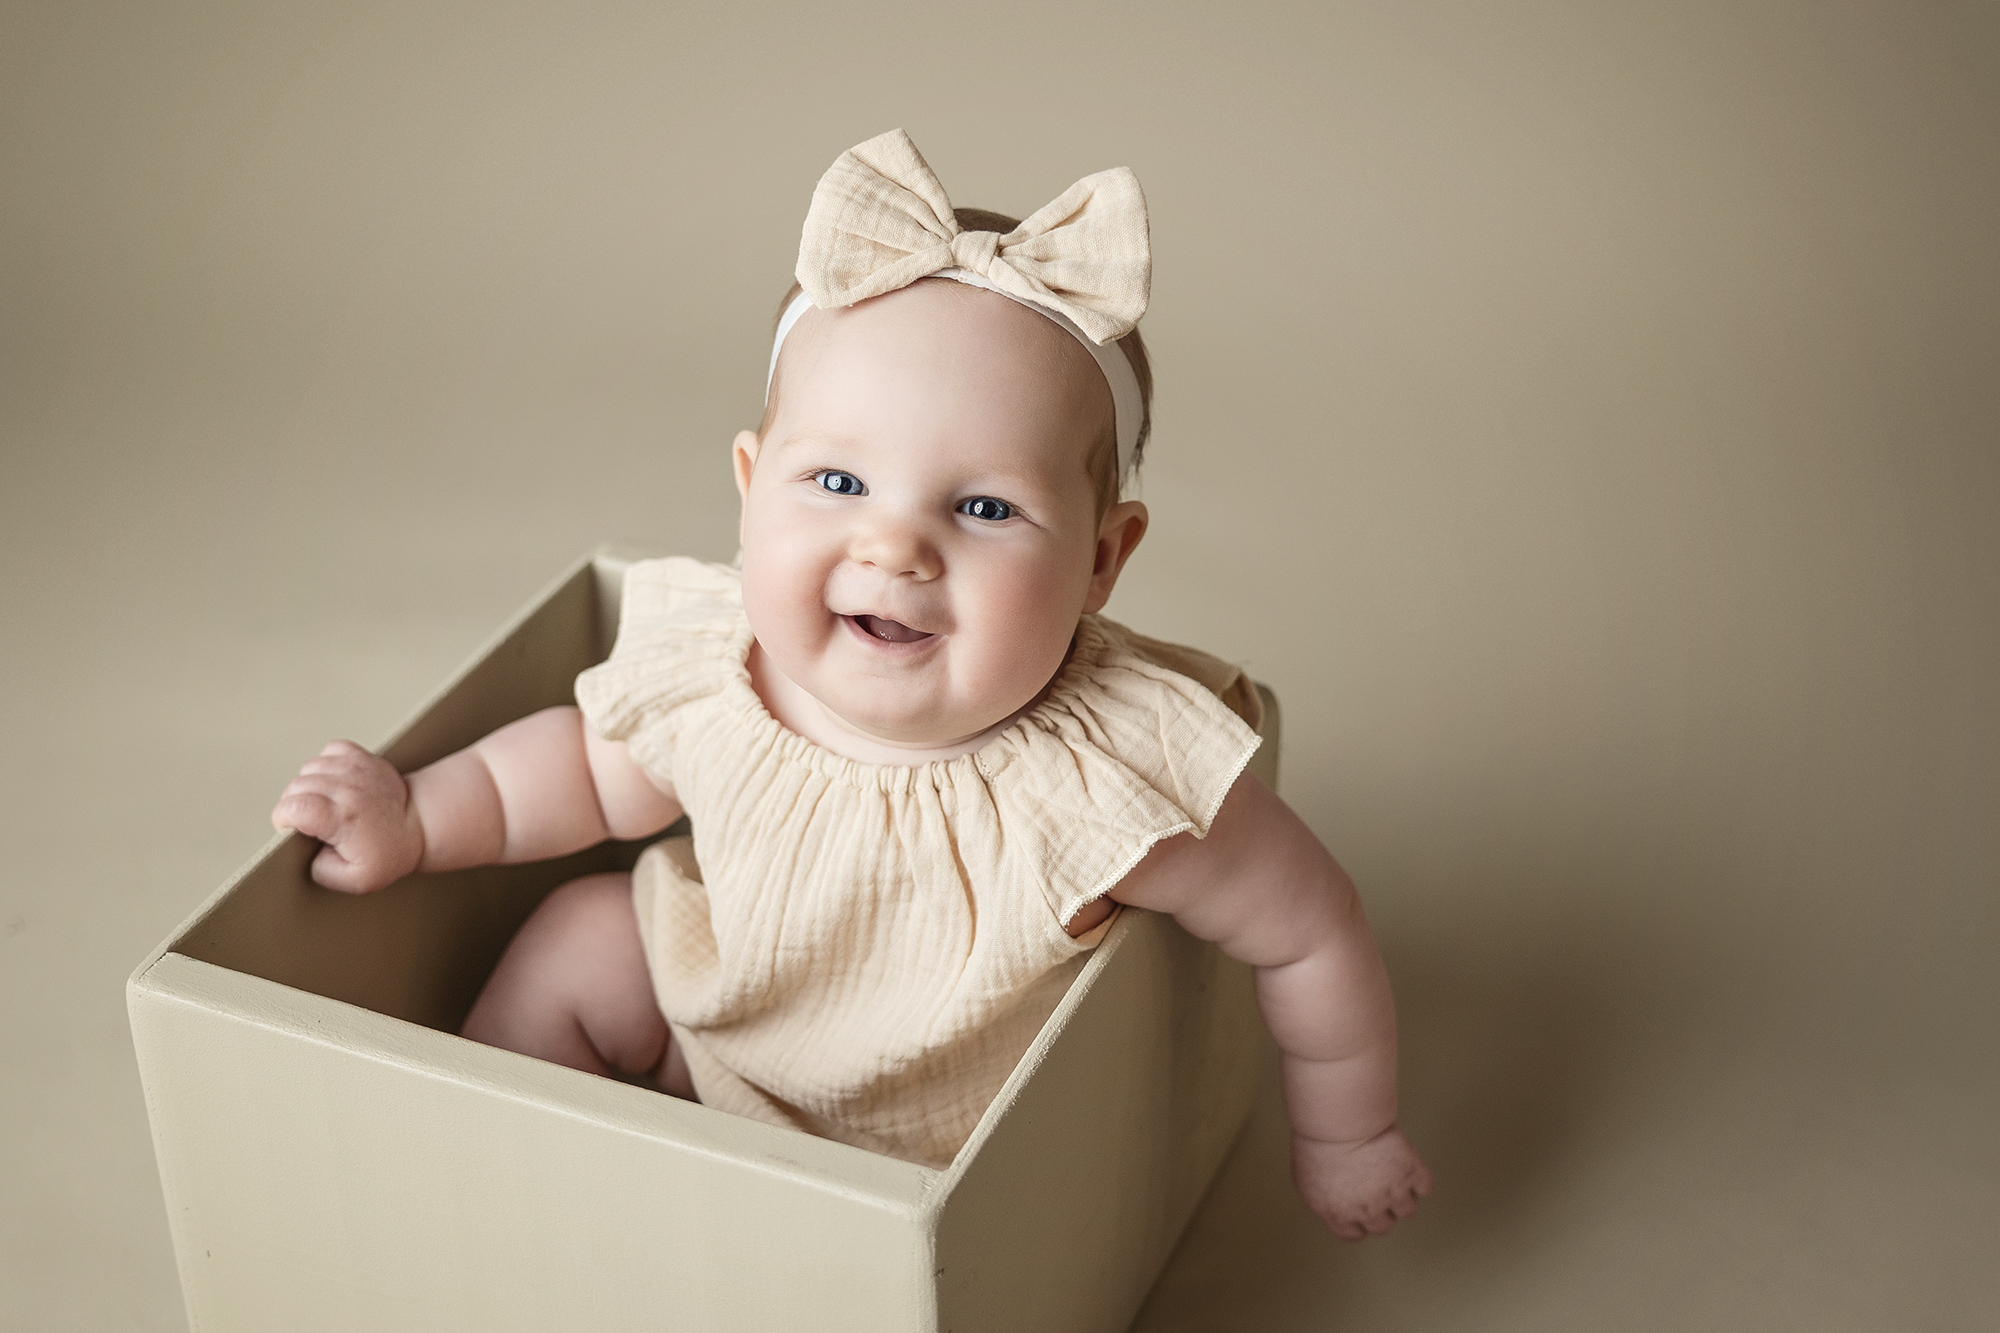 Smiling baby girl posed in a cream colored box wearing a matching romper and bow headband.